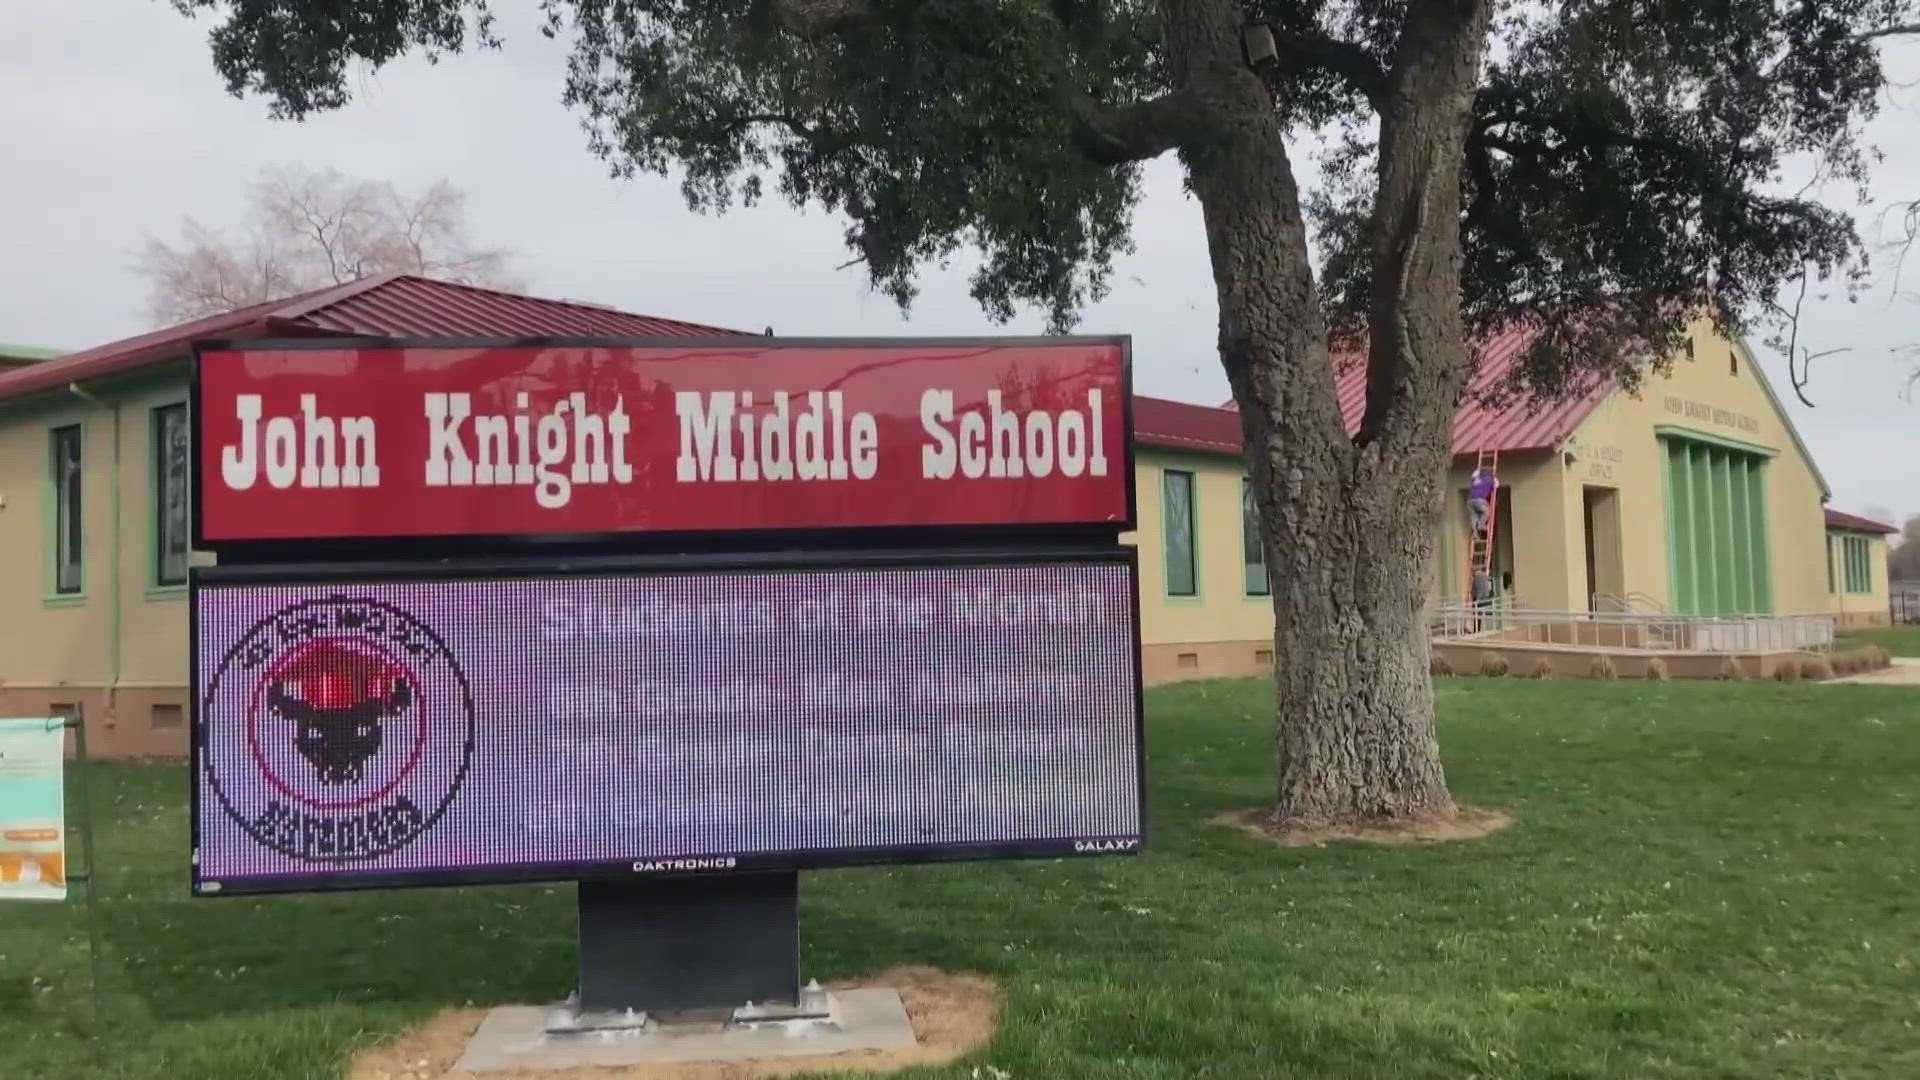 During a press conference Friday, the district said the student who allegedly posted the photos and hateful message is no longer welcomed on the campus at this time.